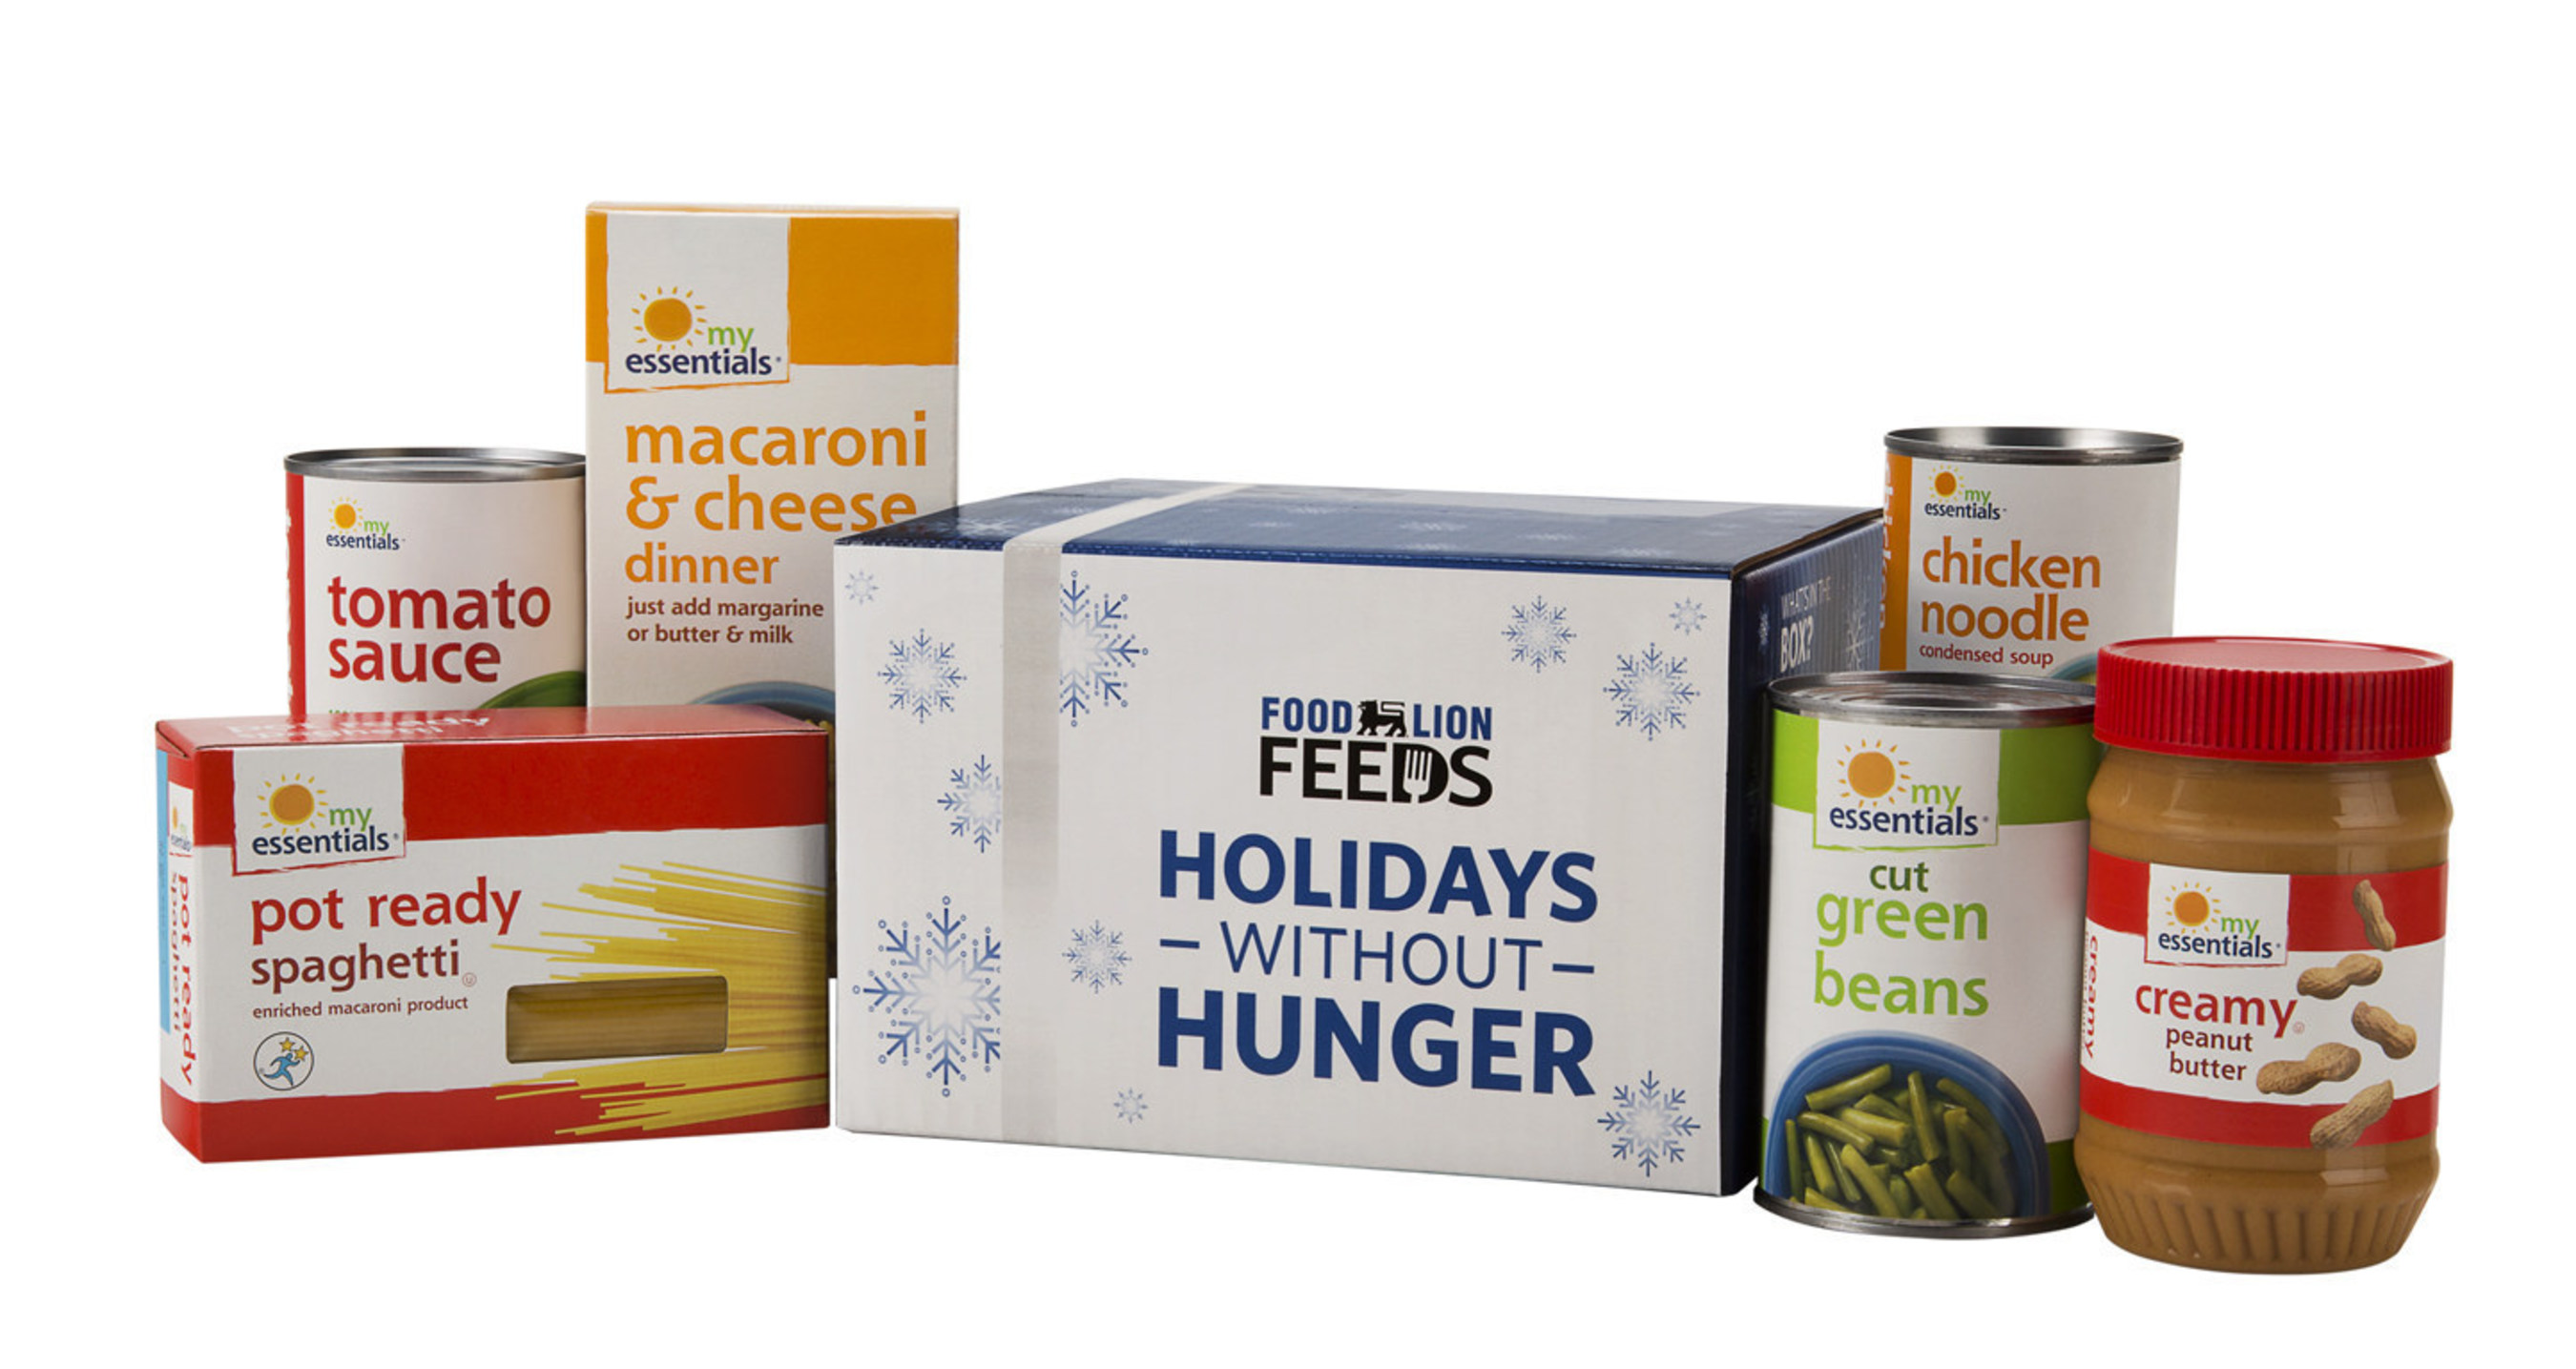 This holiday season, Food Lion is partnering with customers in its more than 1,100 stores, Nov. 19 – Dec. 23, to help solve hunger through its Food Lion Feeds "Holidays Without Hunger" campaign. Through the campaign, customers can purchase and donate a specially-marked "Holidays Without Hunger" food box for $5, while supplies last, or make a cash donation at checkout. One hundred percent of cash donations benefit Feeding America(R), the largest domestic hunger relief charity, and its network of local food banks.